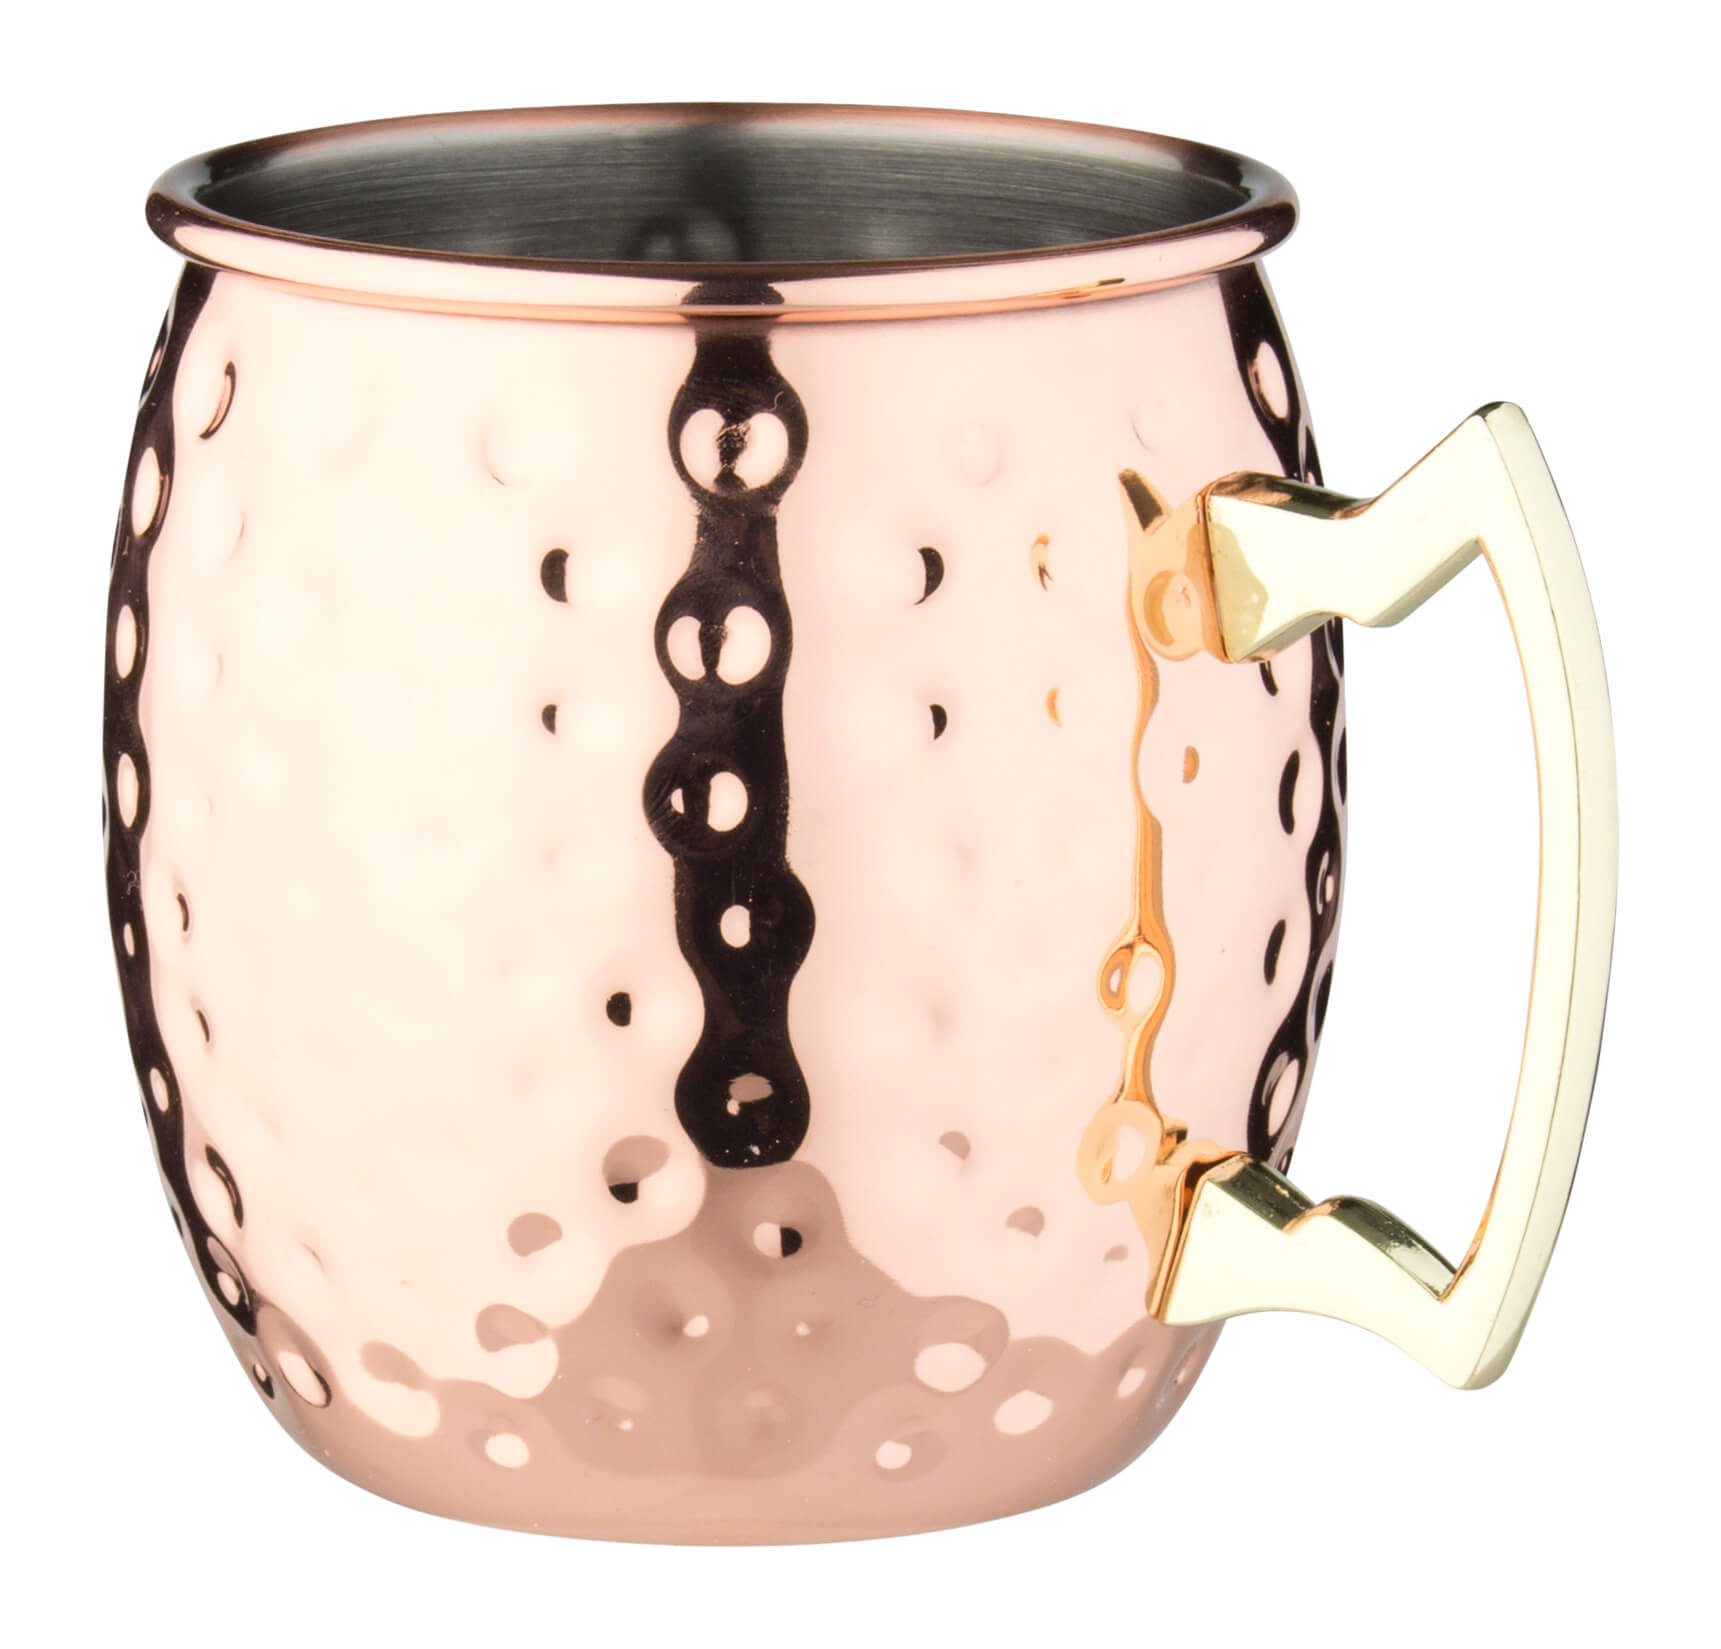 Stainless steel mug "Moscow Mule", hammered, copper colored - 420ml